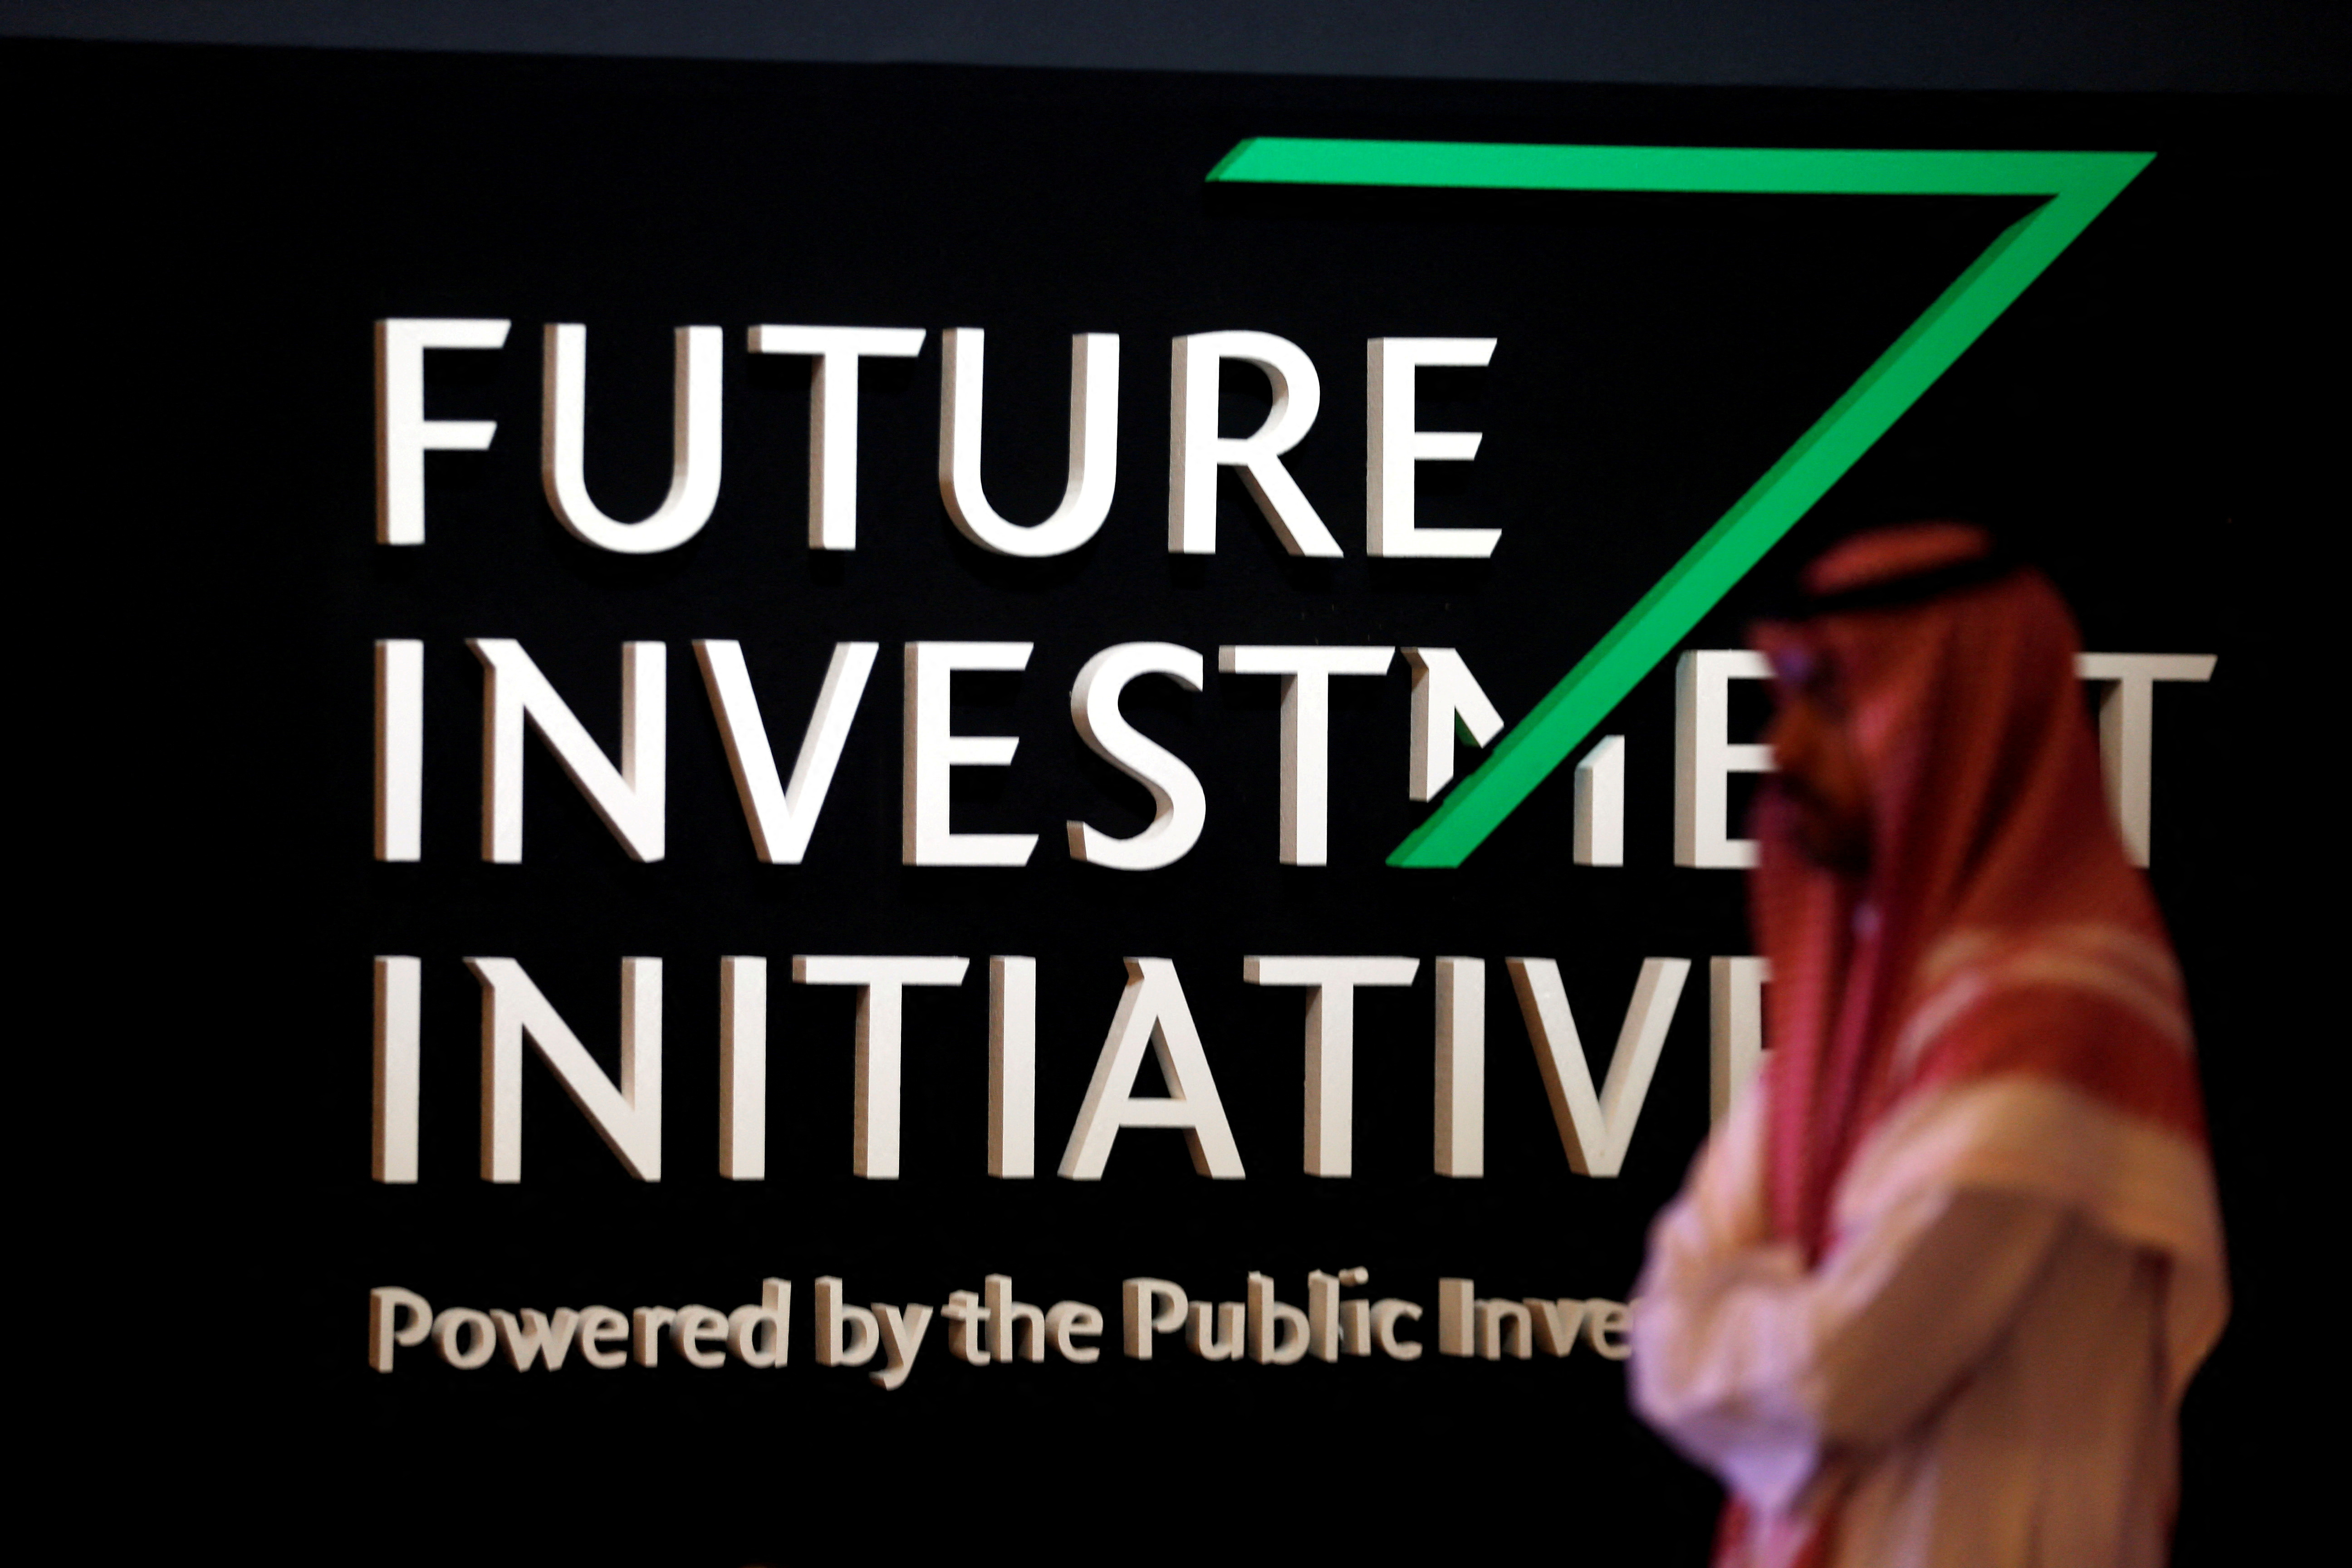 A Saudi man walks past the sign of the Future Investment Initiative during the last day of the investment conference in Riyadh